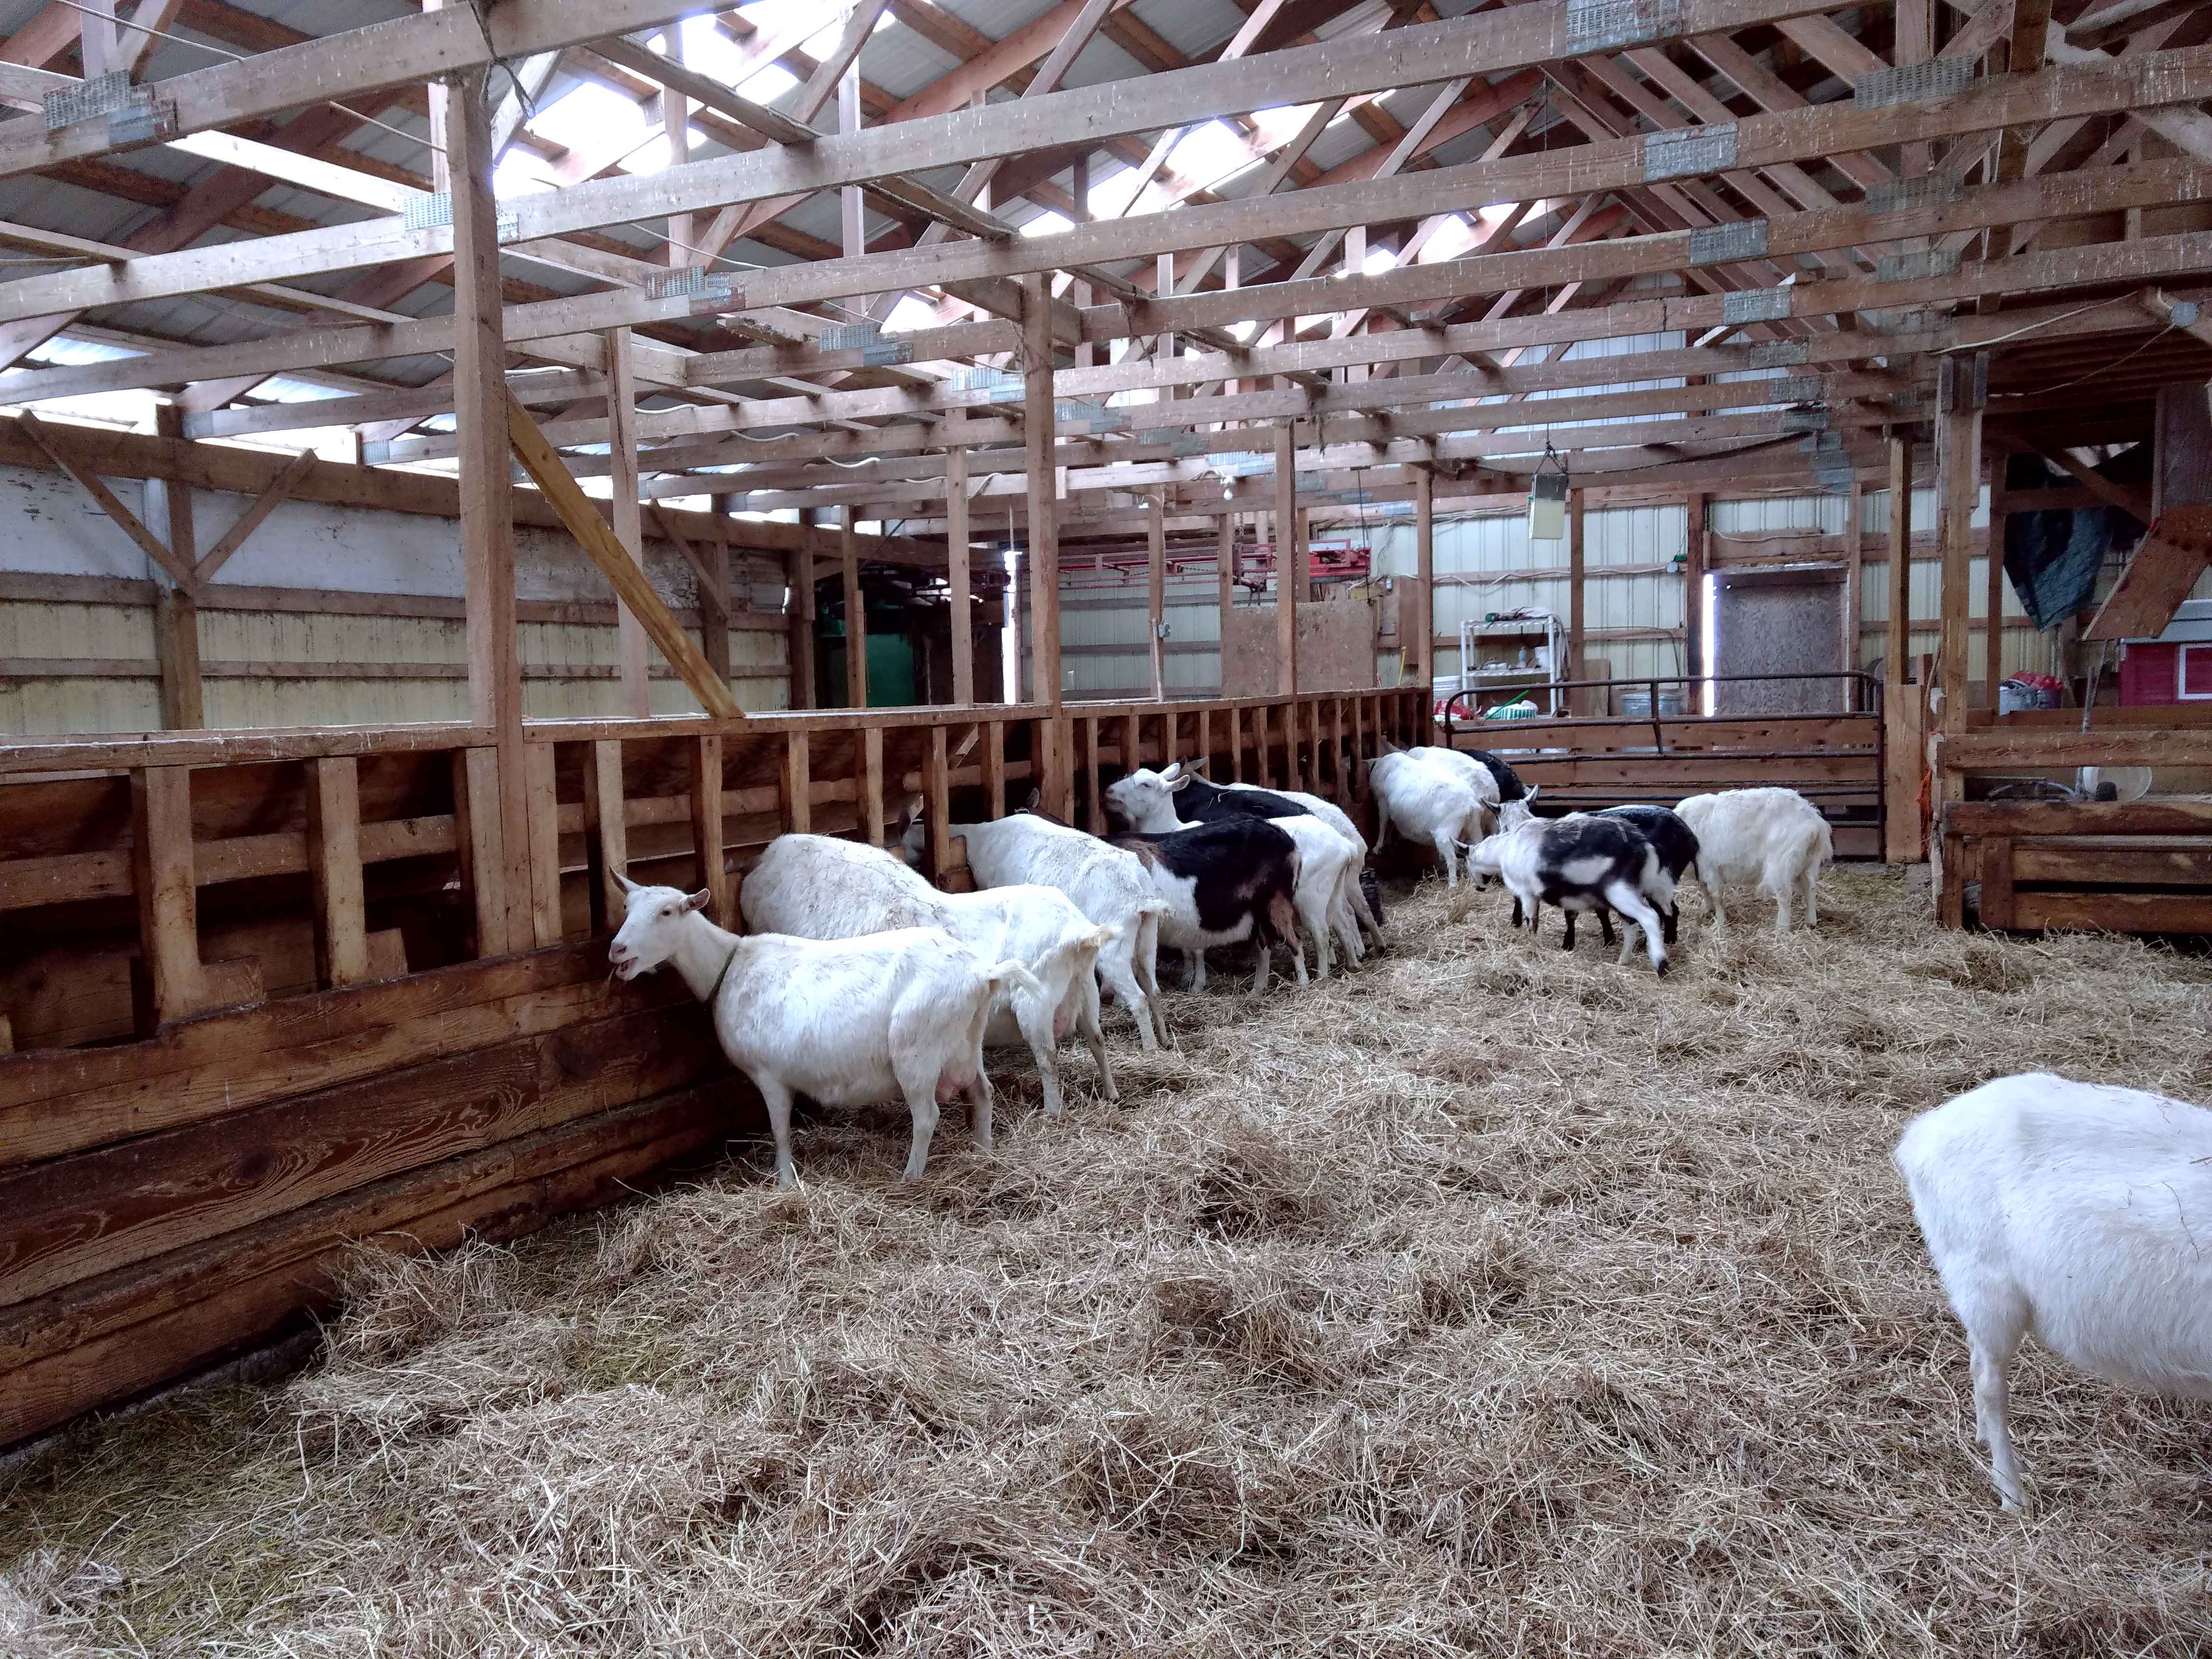 How do the animals stay warm? - Lively Run Goat Dairy